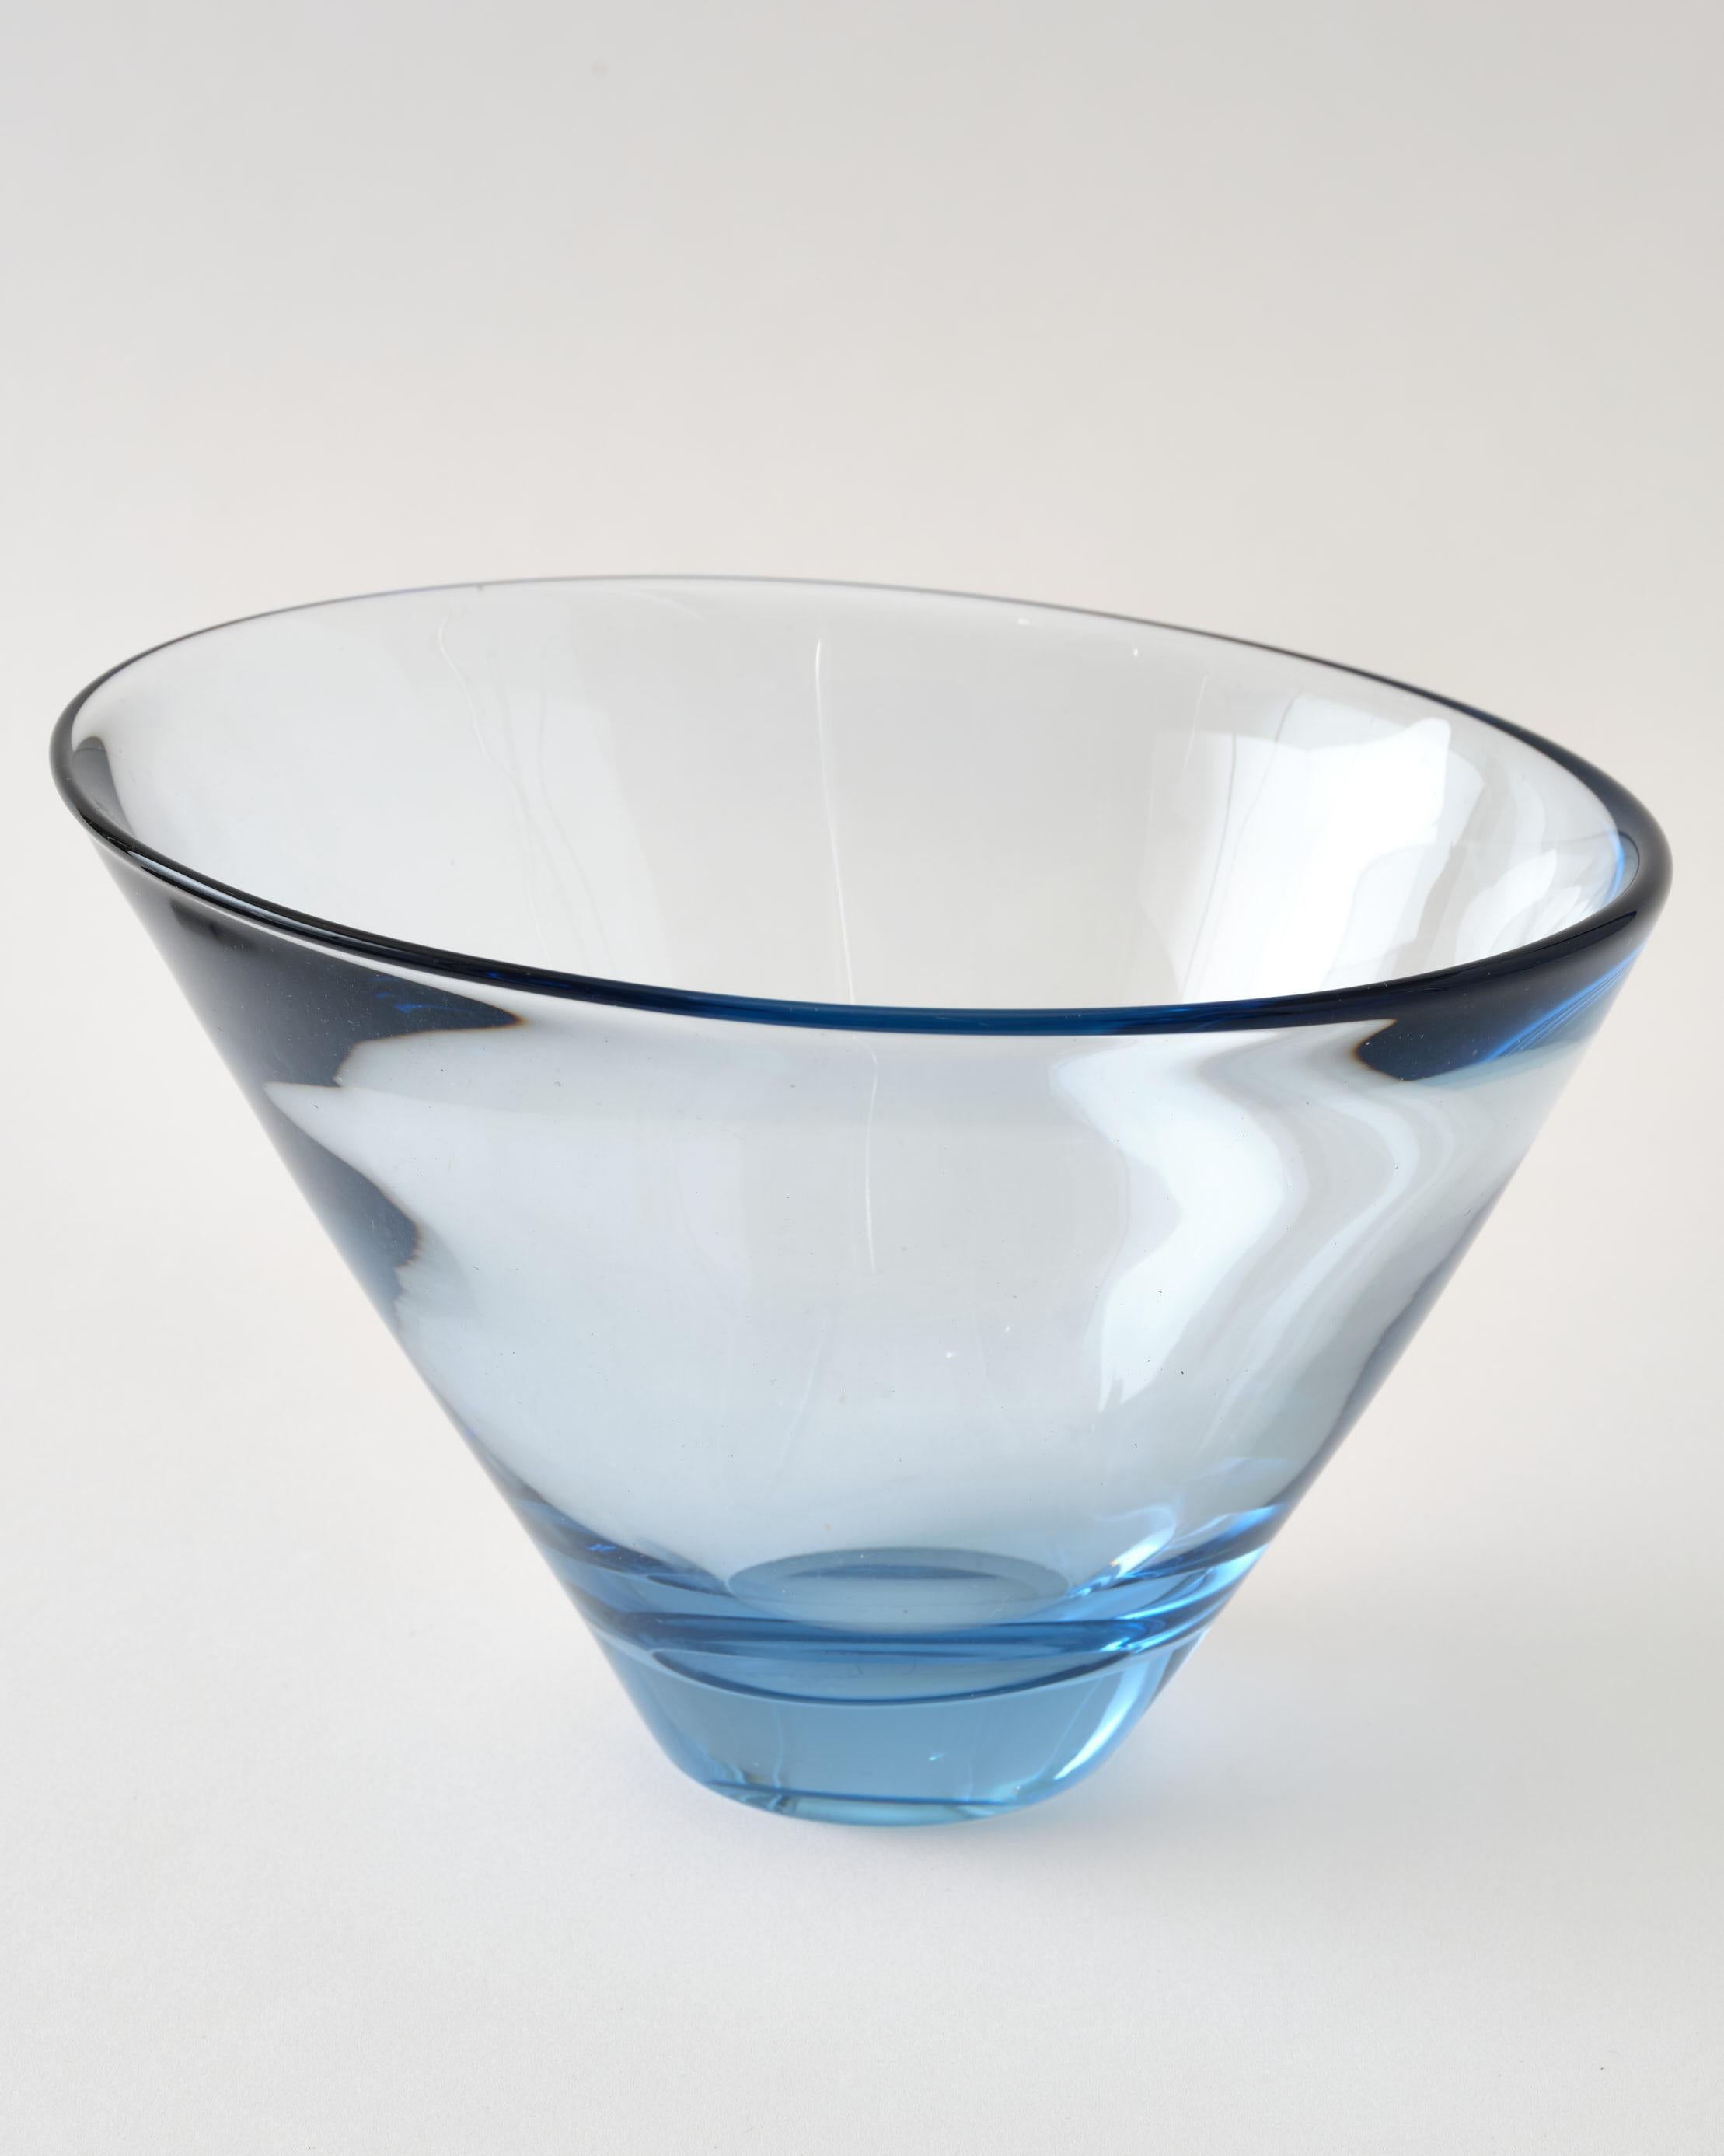 Mid-Century Modern Glass Bowl by Holmegaard, Denmark, Light Blue Color, Heavy Round Shape, C 1960 For Sale